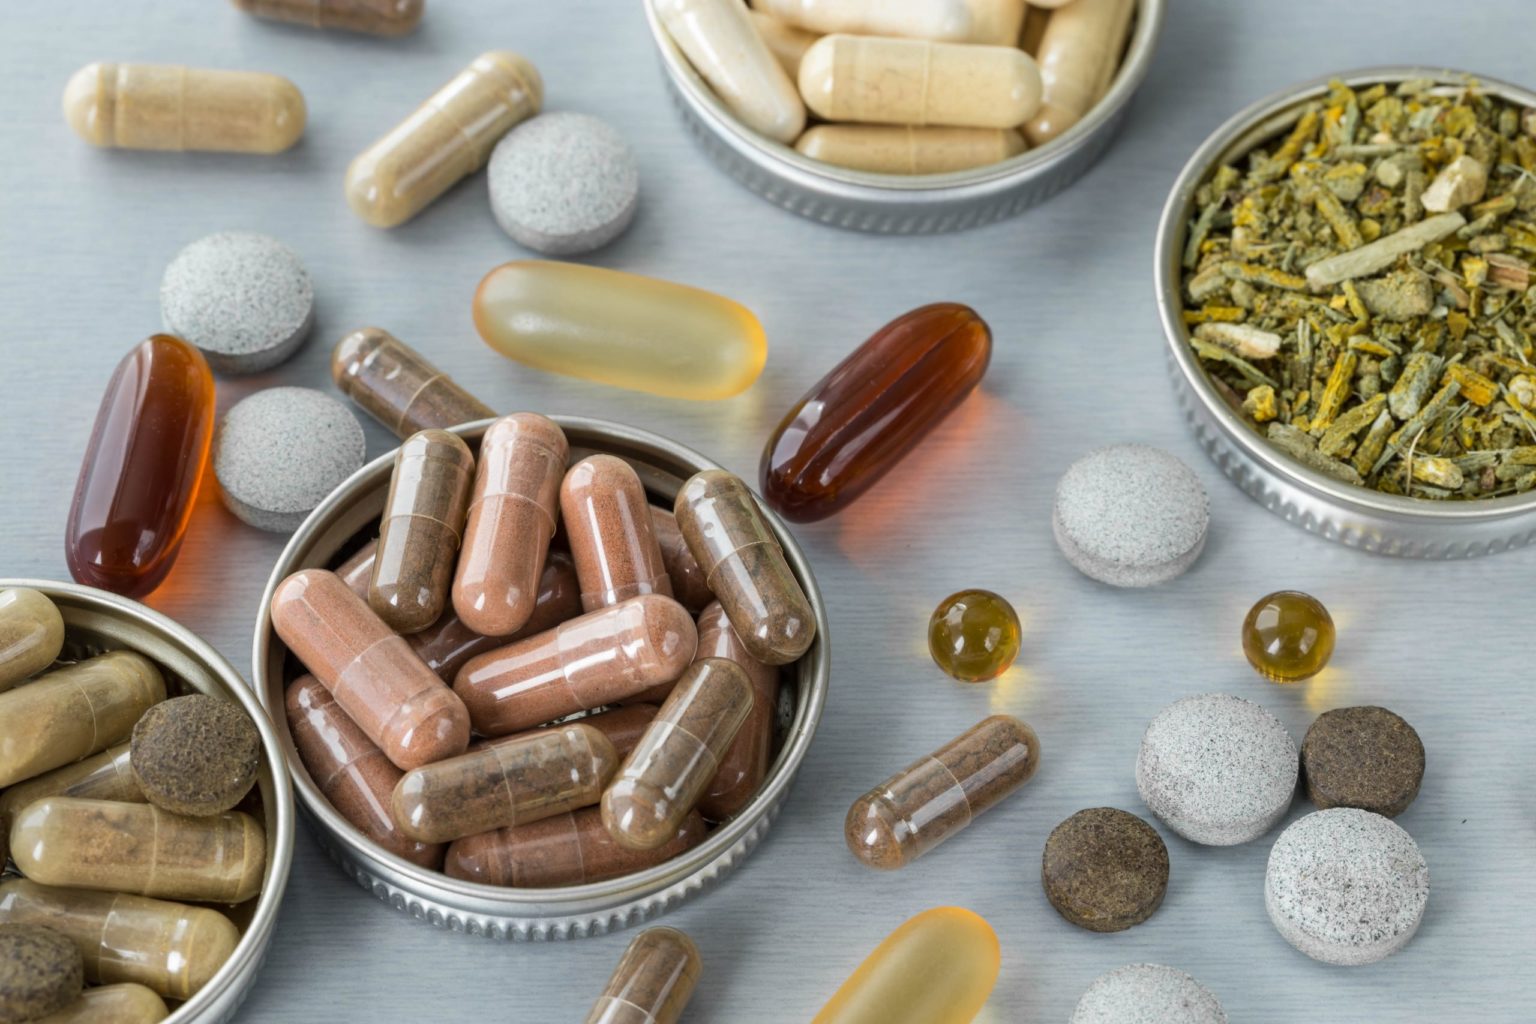 Pharmaceutical Excipients Market: Witnessing High Growth in the Coming Years